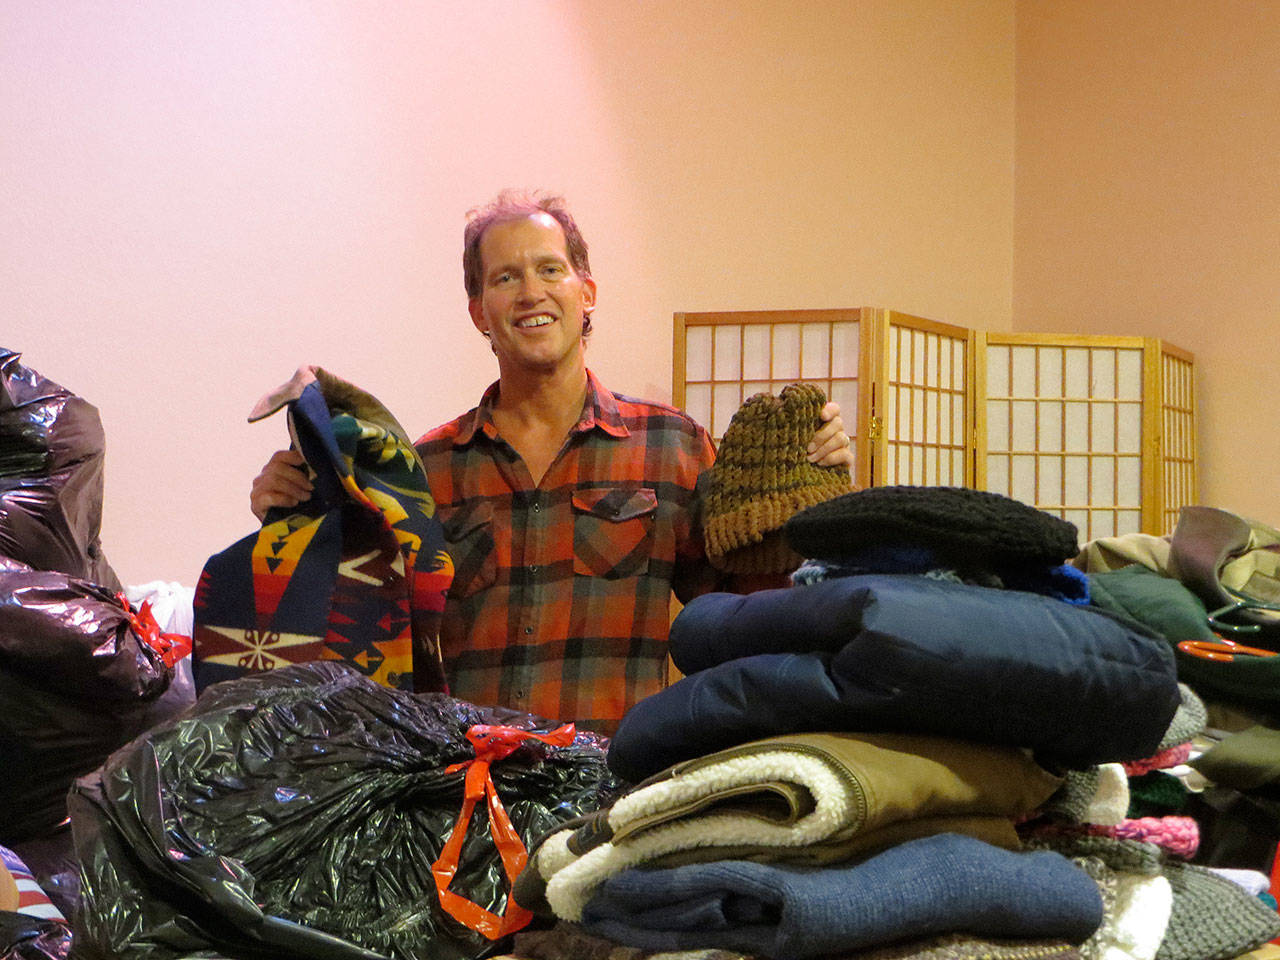 Steve Ford, co-owner of Drennan & Ford Funeral Home and Crematory, displays the hundreds of pieces of cold-weather clothing donated by Clallam County residents as part of the Drennan & Ford Funeral Home’s recent “Sweaters for Veterans” collection drive. The cold weather clothing will be distributed by “Voices for Veterans” and local veteran groups to area veterans in need of such clothing during the winter months. This is the firm’s ninth year organizing this project, part of its many annual and ongoing projects to assist veterans and active duty service personnel. For more information about “Sweaters for Veterans,” call 360-457-1210 or email to steve@drennanford.com. Submitted photo